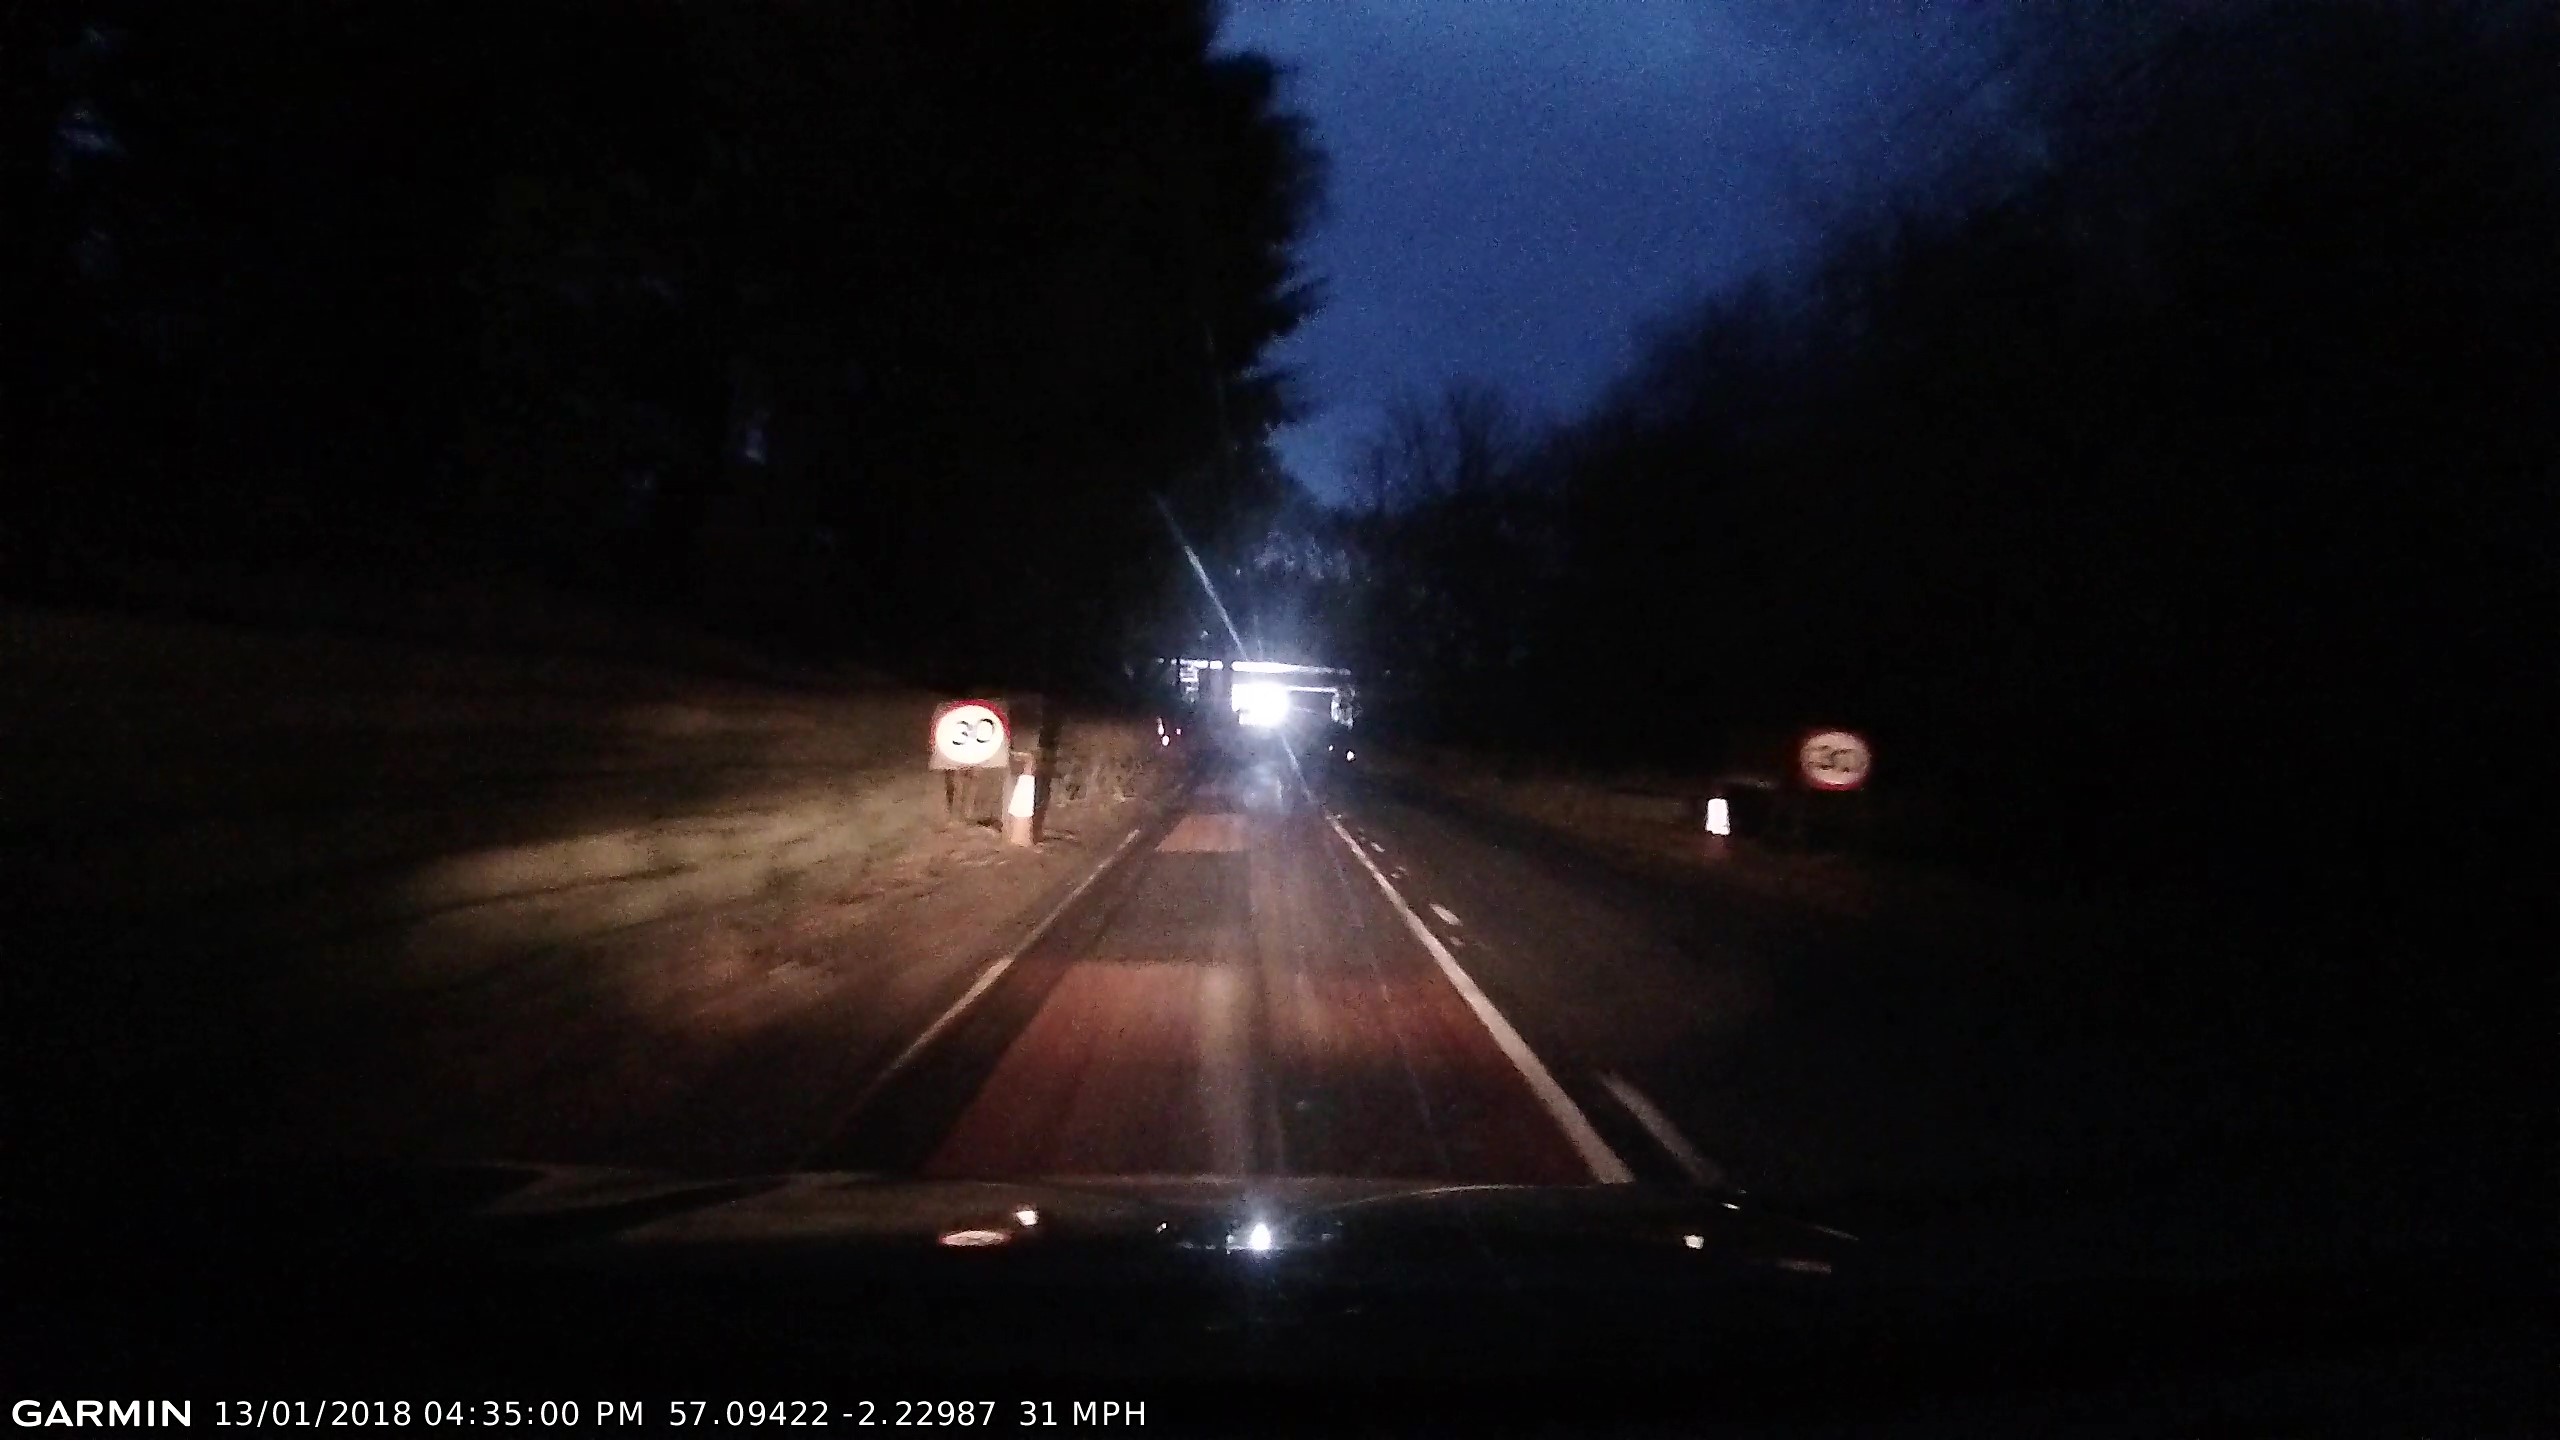 Motorists reported a bright light shining into on-coming traffic from an AWPR work site by the B9077.